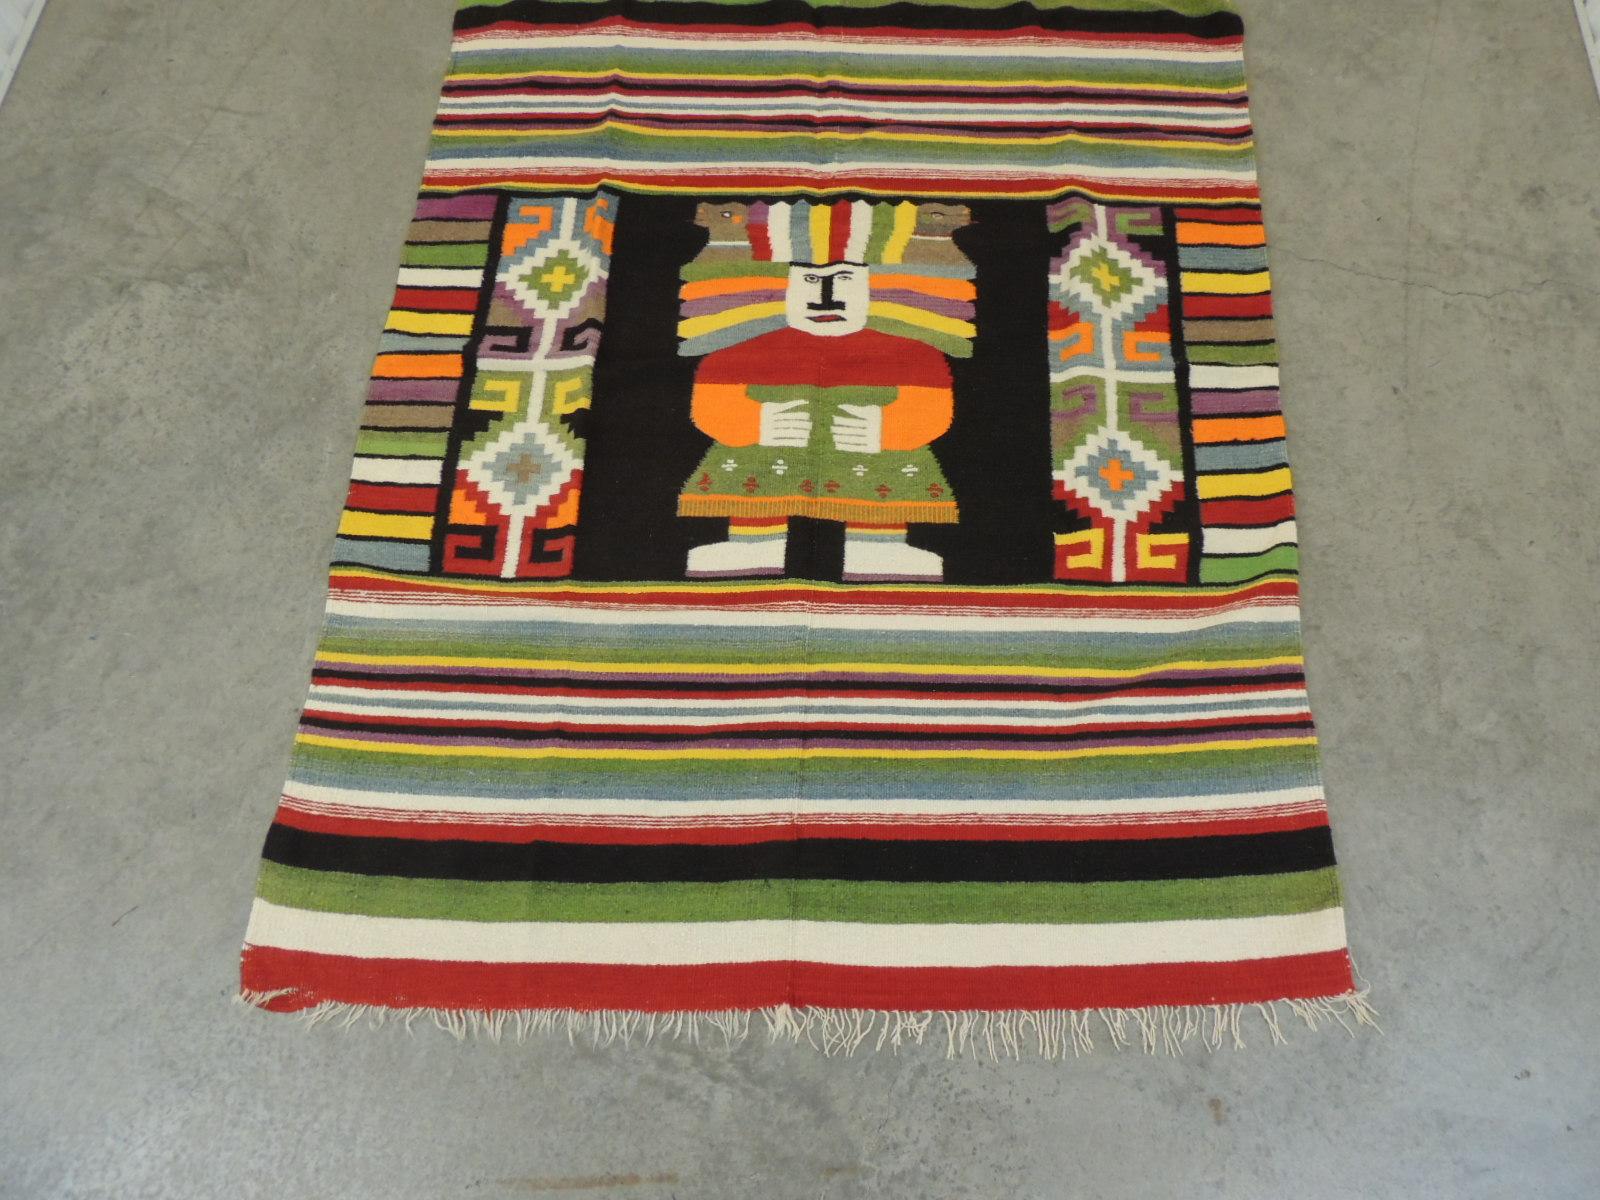 Large vintage Peruvian warrior throw with colorful stripes.
Large enough to use as a blanket on a twin bed.
In shades of orange, green, red and black.
Hand-twisted fringes on both sides. Reversible.
Size: 52